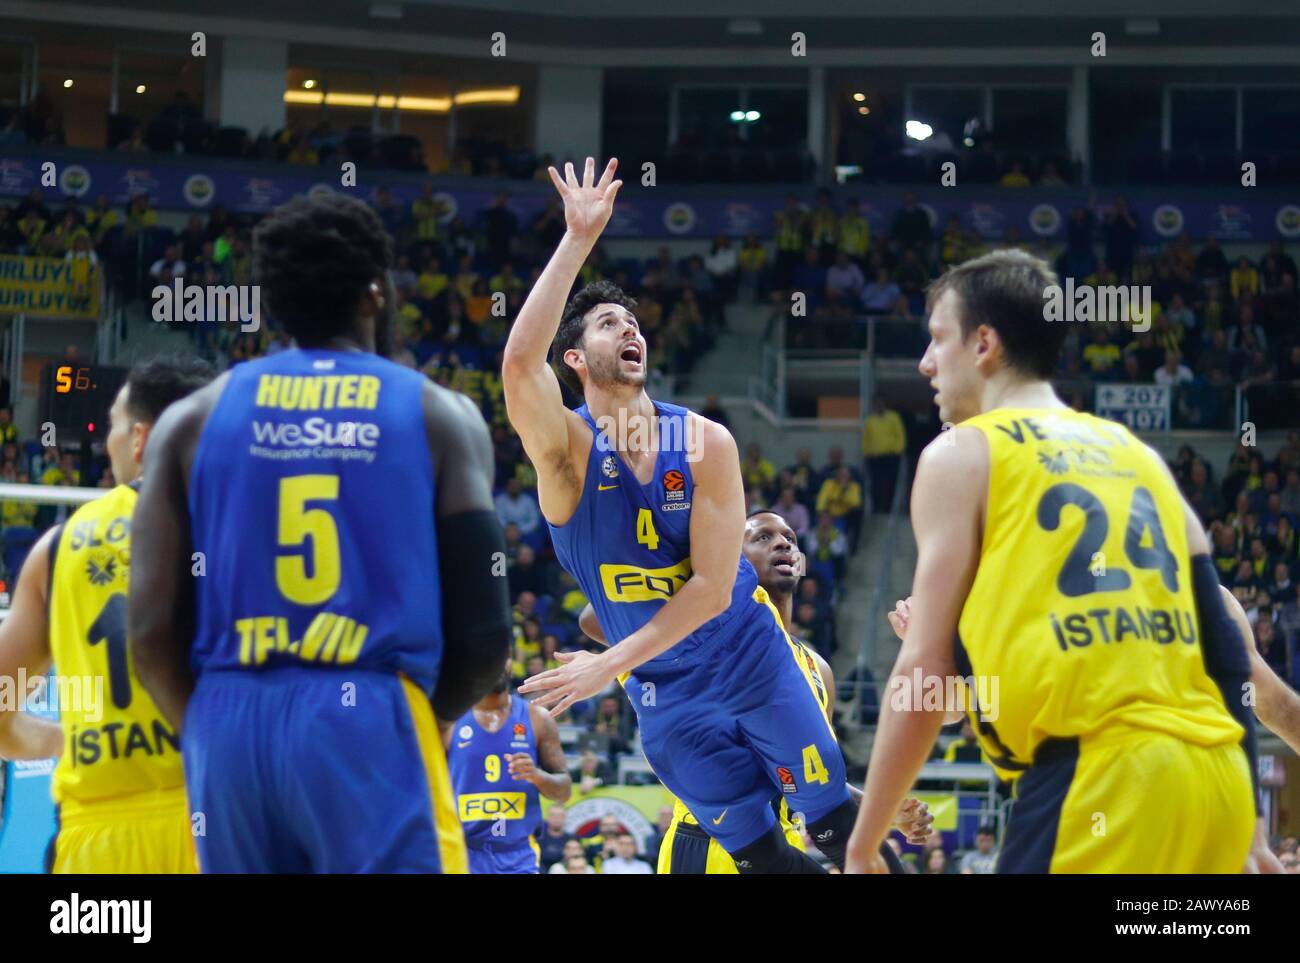 ISTANBUL / TURKEY - FEBRUARY 7, 2020: Angelo Caloiaro	during EuroLeague 2019-20 Round 24 basketball game between Fenerbahce and Maccabi Tel Aviv at Ulker Sports Arena. Stock Photo